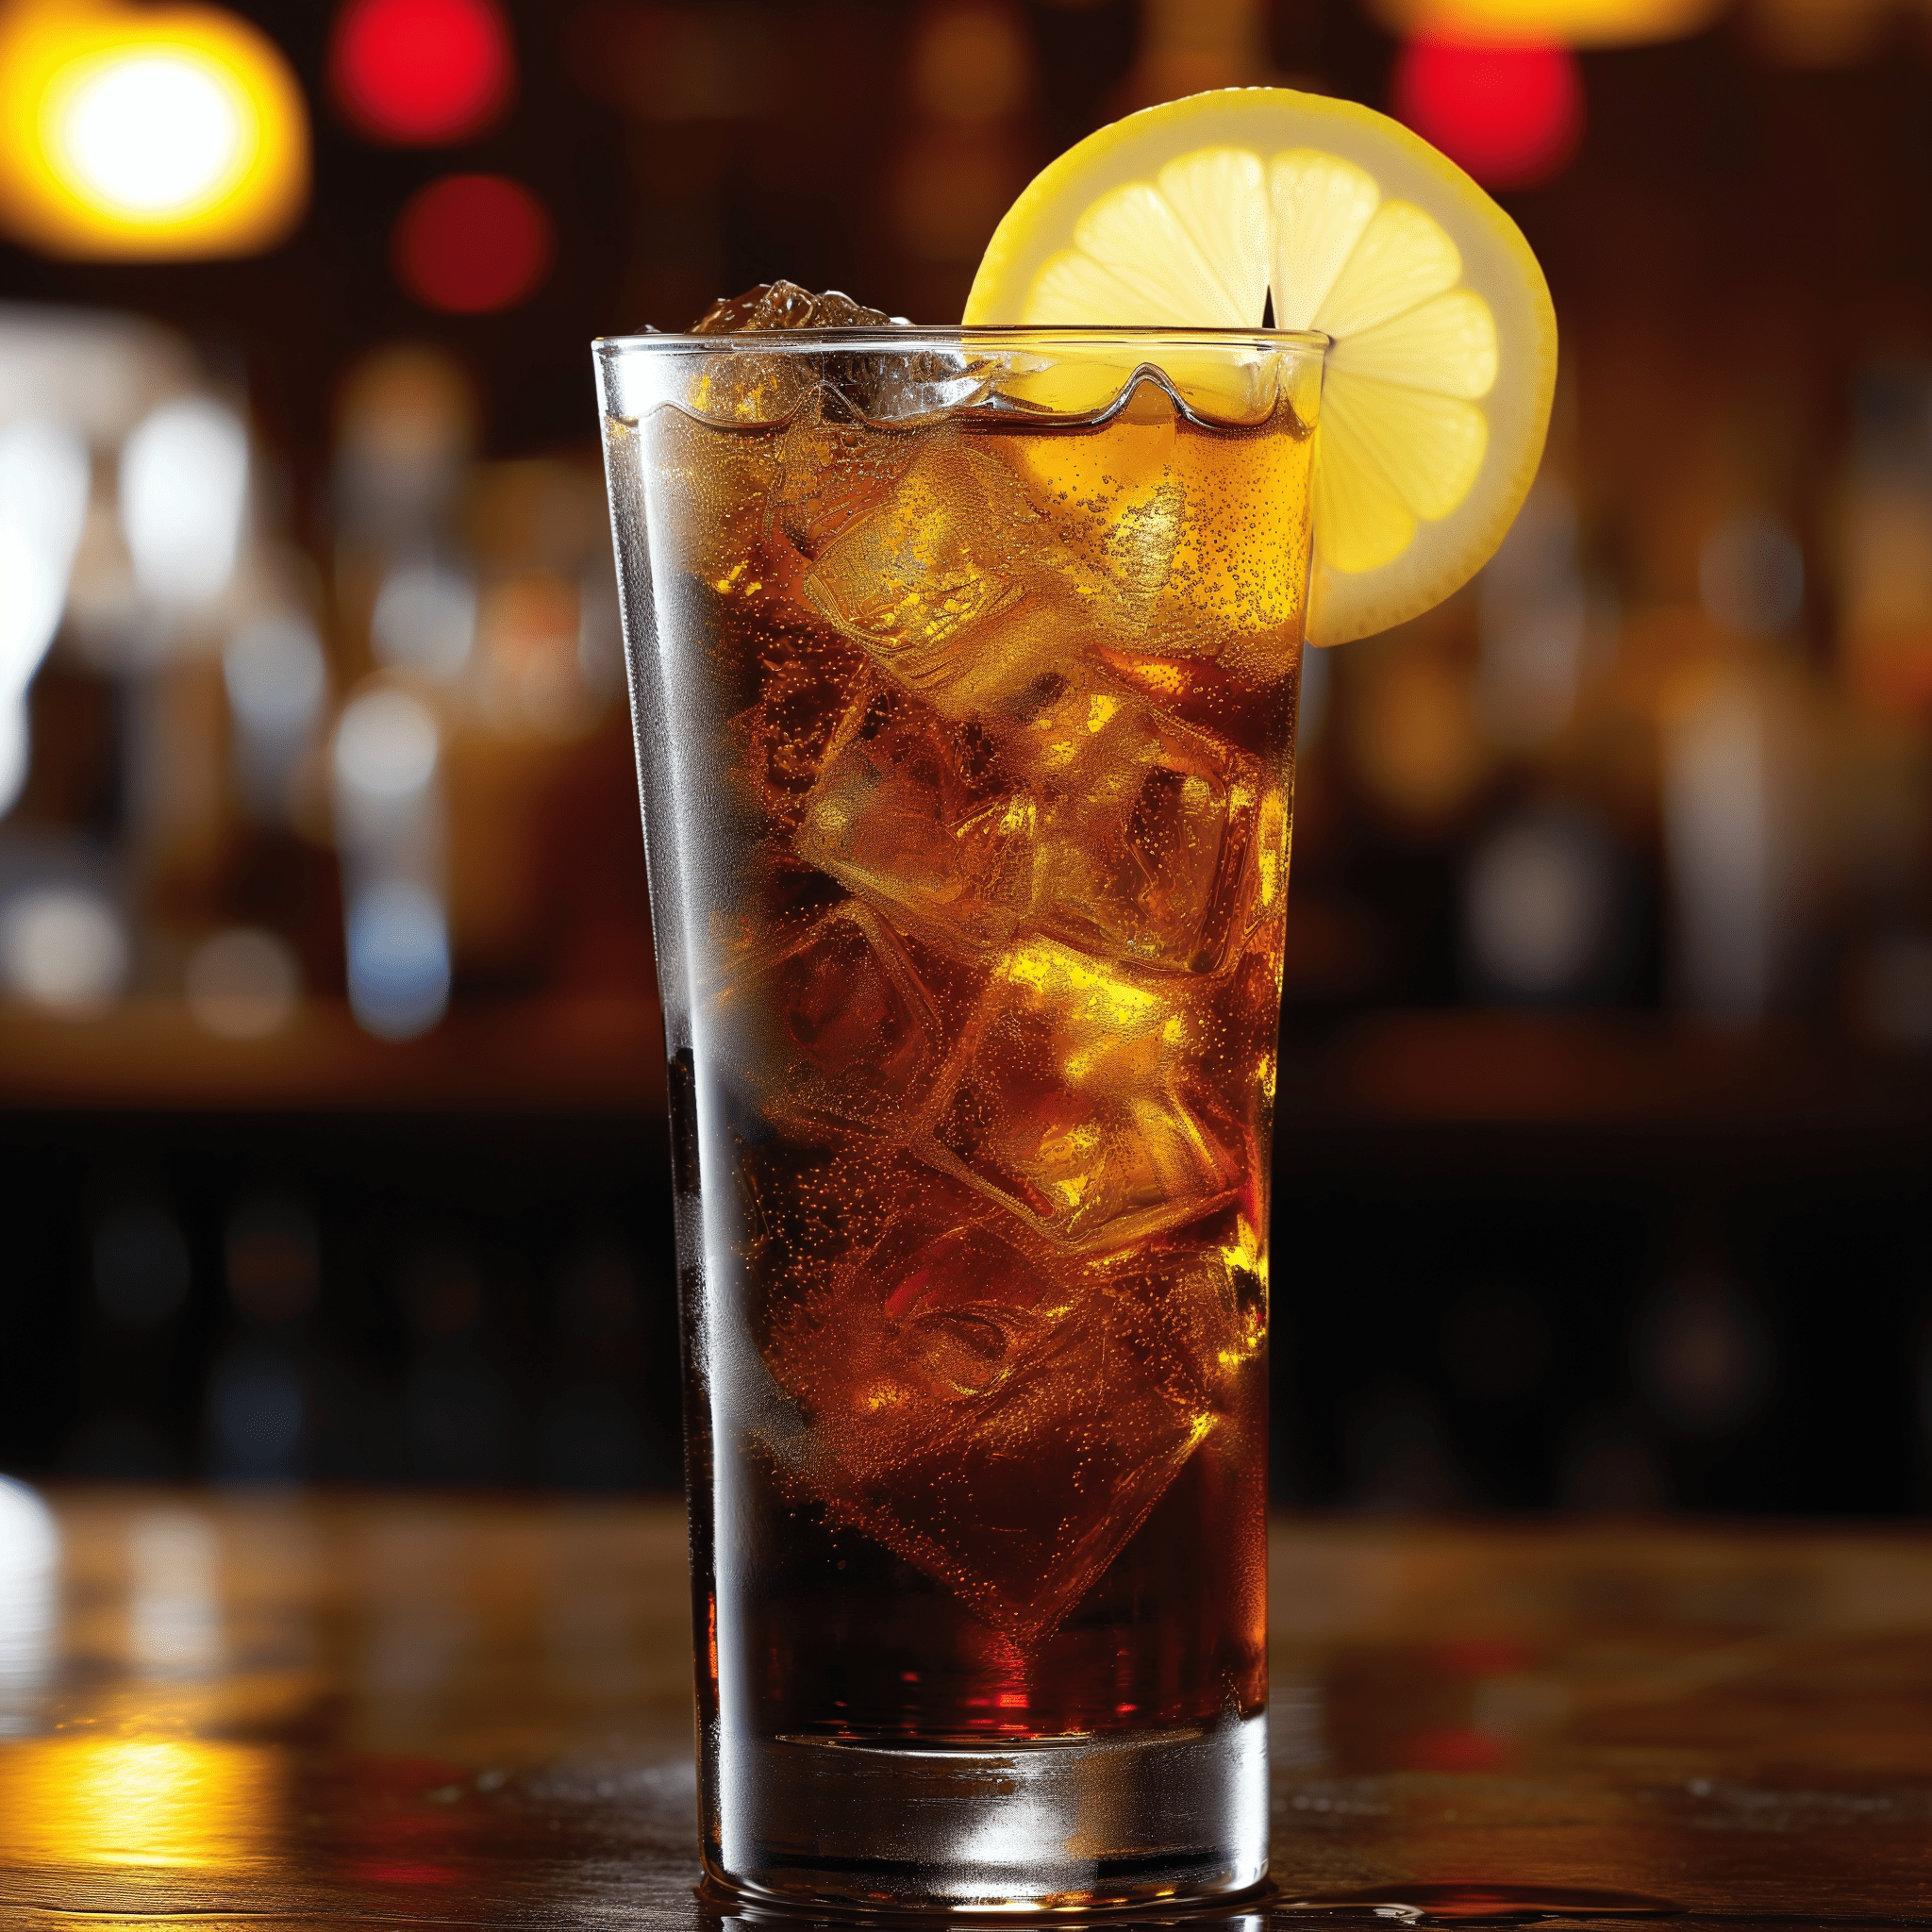 Brandy and Coke Cocktail Recipe - The Brandy and Coke is a harmonious blend of the warm, fruity notes of brandy mellowed by the sweet, caramel-like flavors of cola. It's a rich, full-bodied cocktail with a pleasant sweetness that's counterbalanced by the subtle acidity and effervescence of the soda.